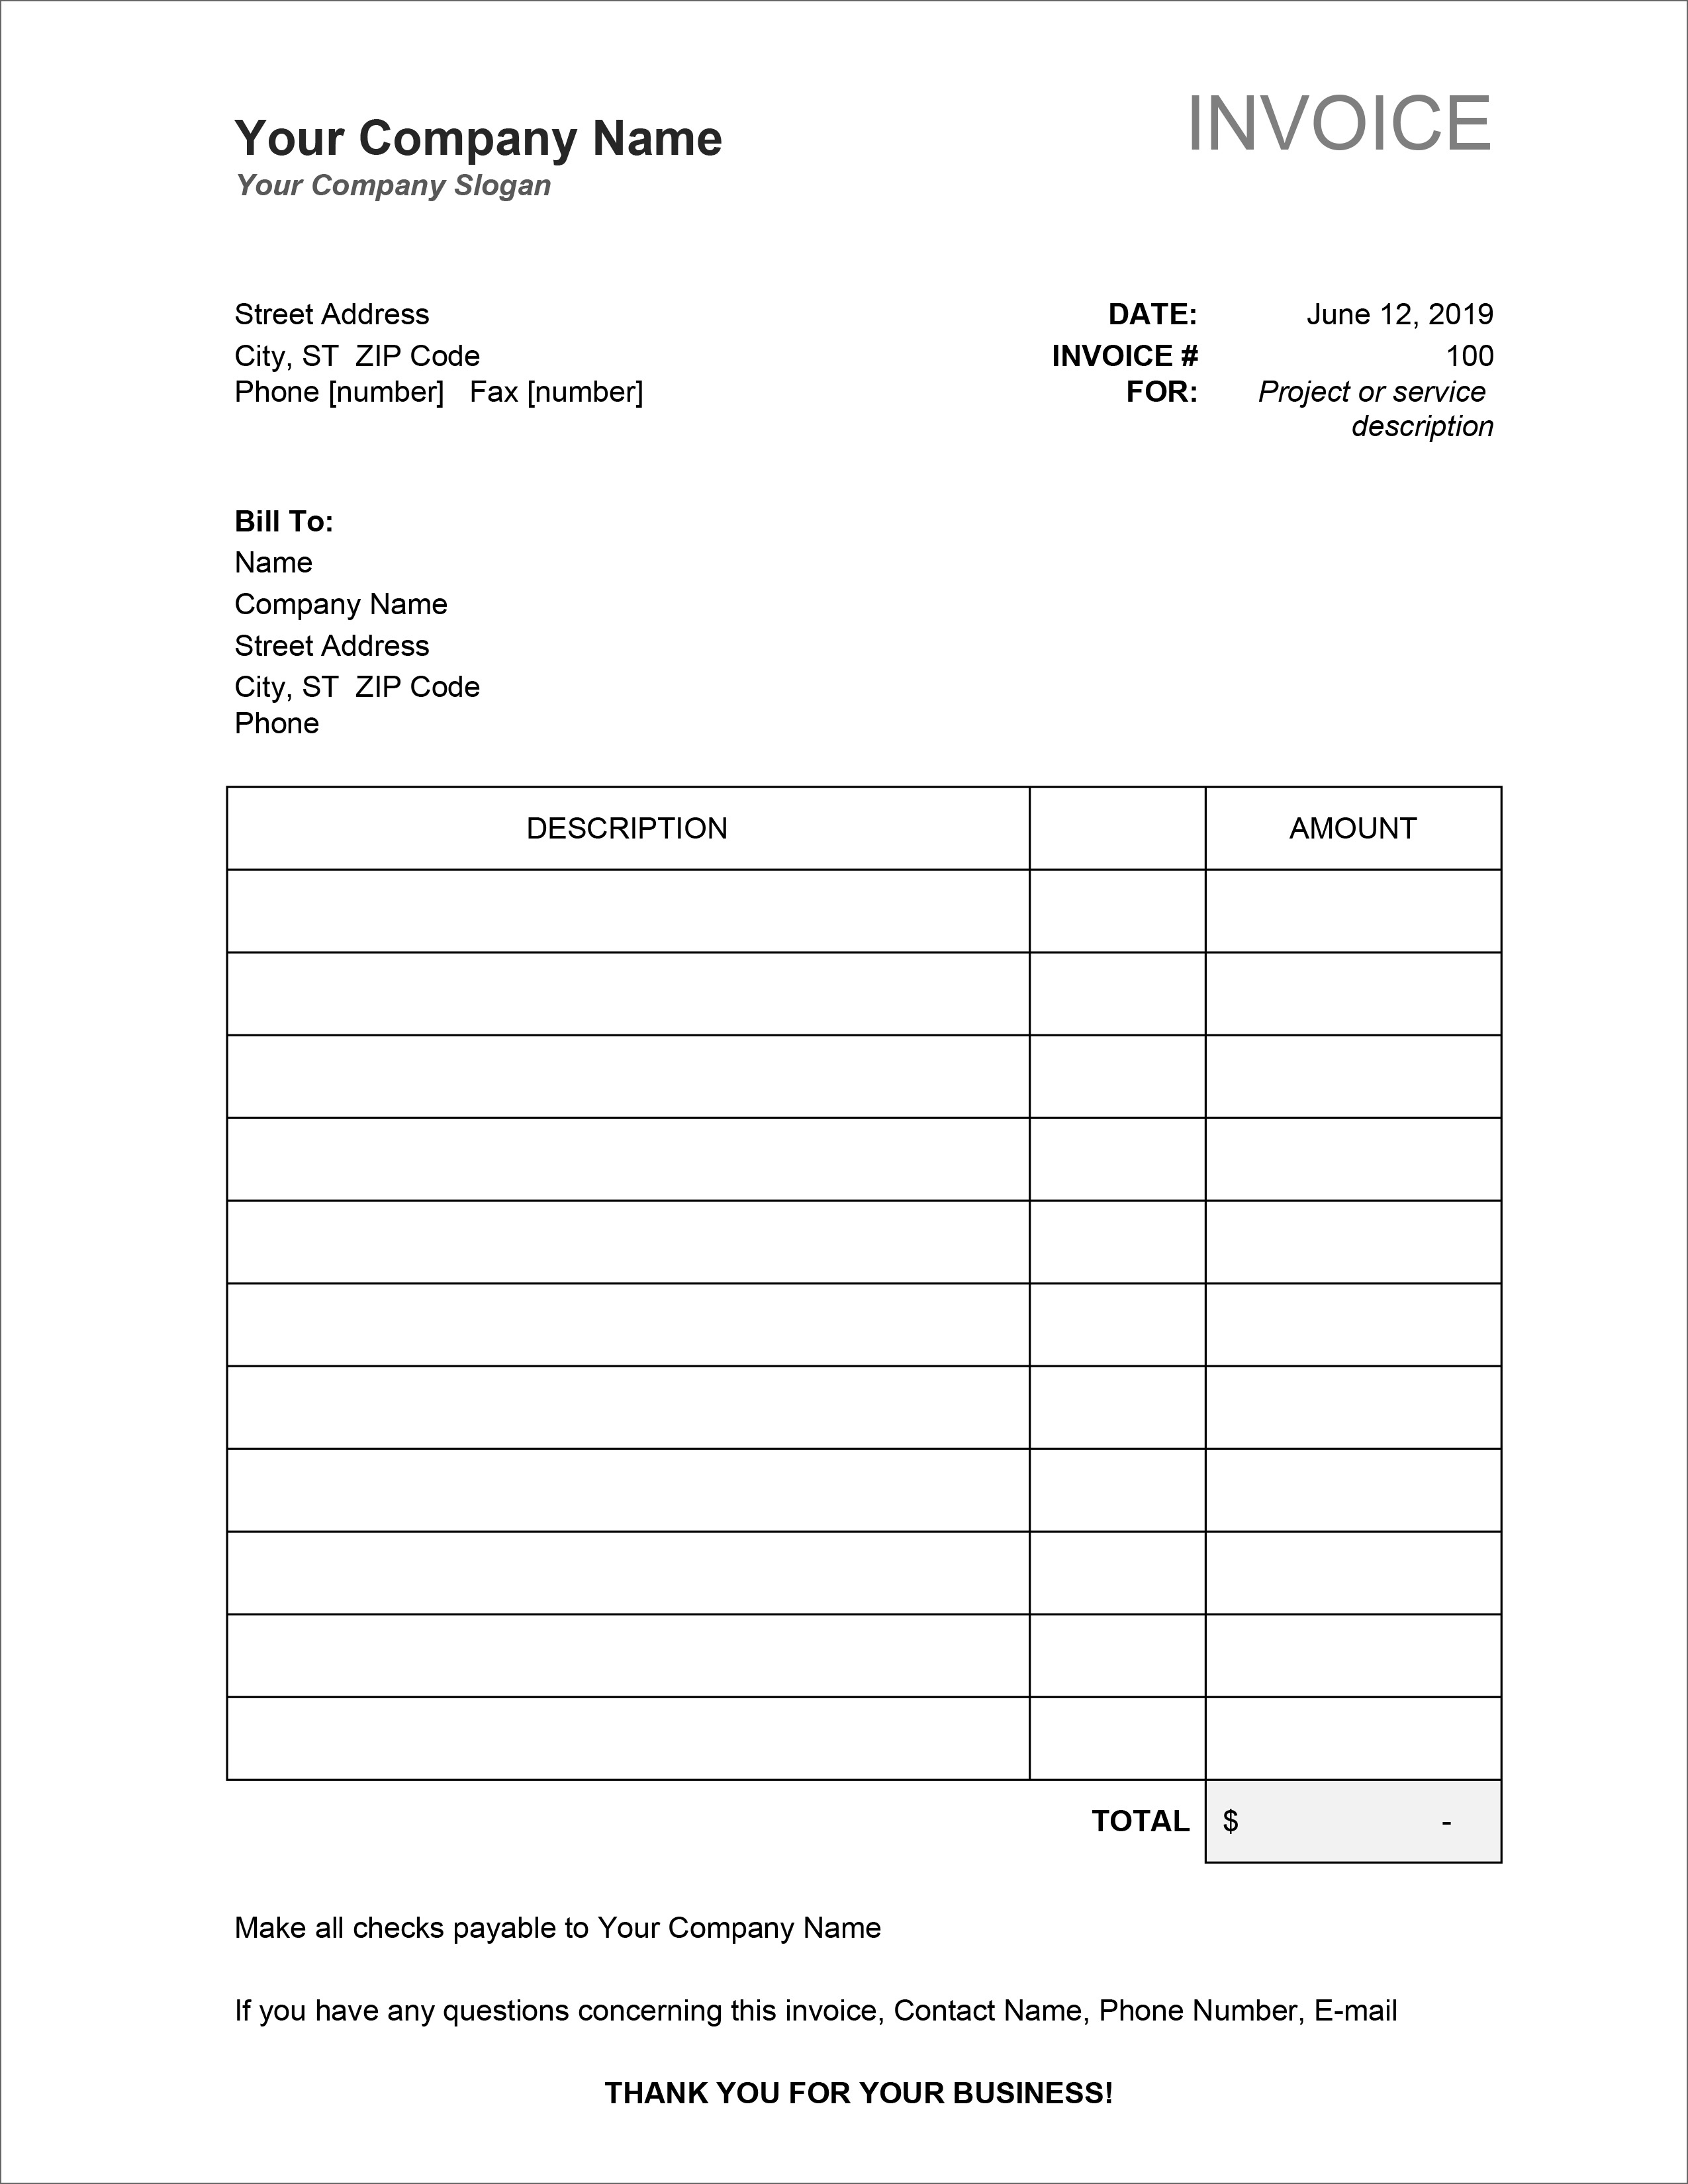 32 Free Invoice Templates In Microsoft Excel And Docx Formats regarding Free Business Invoice Template Downloads